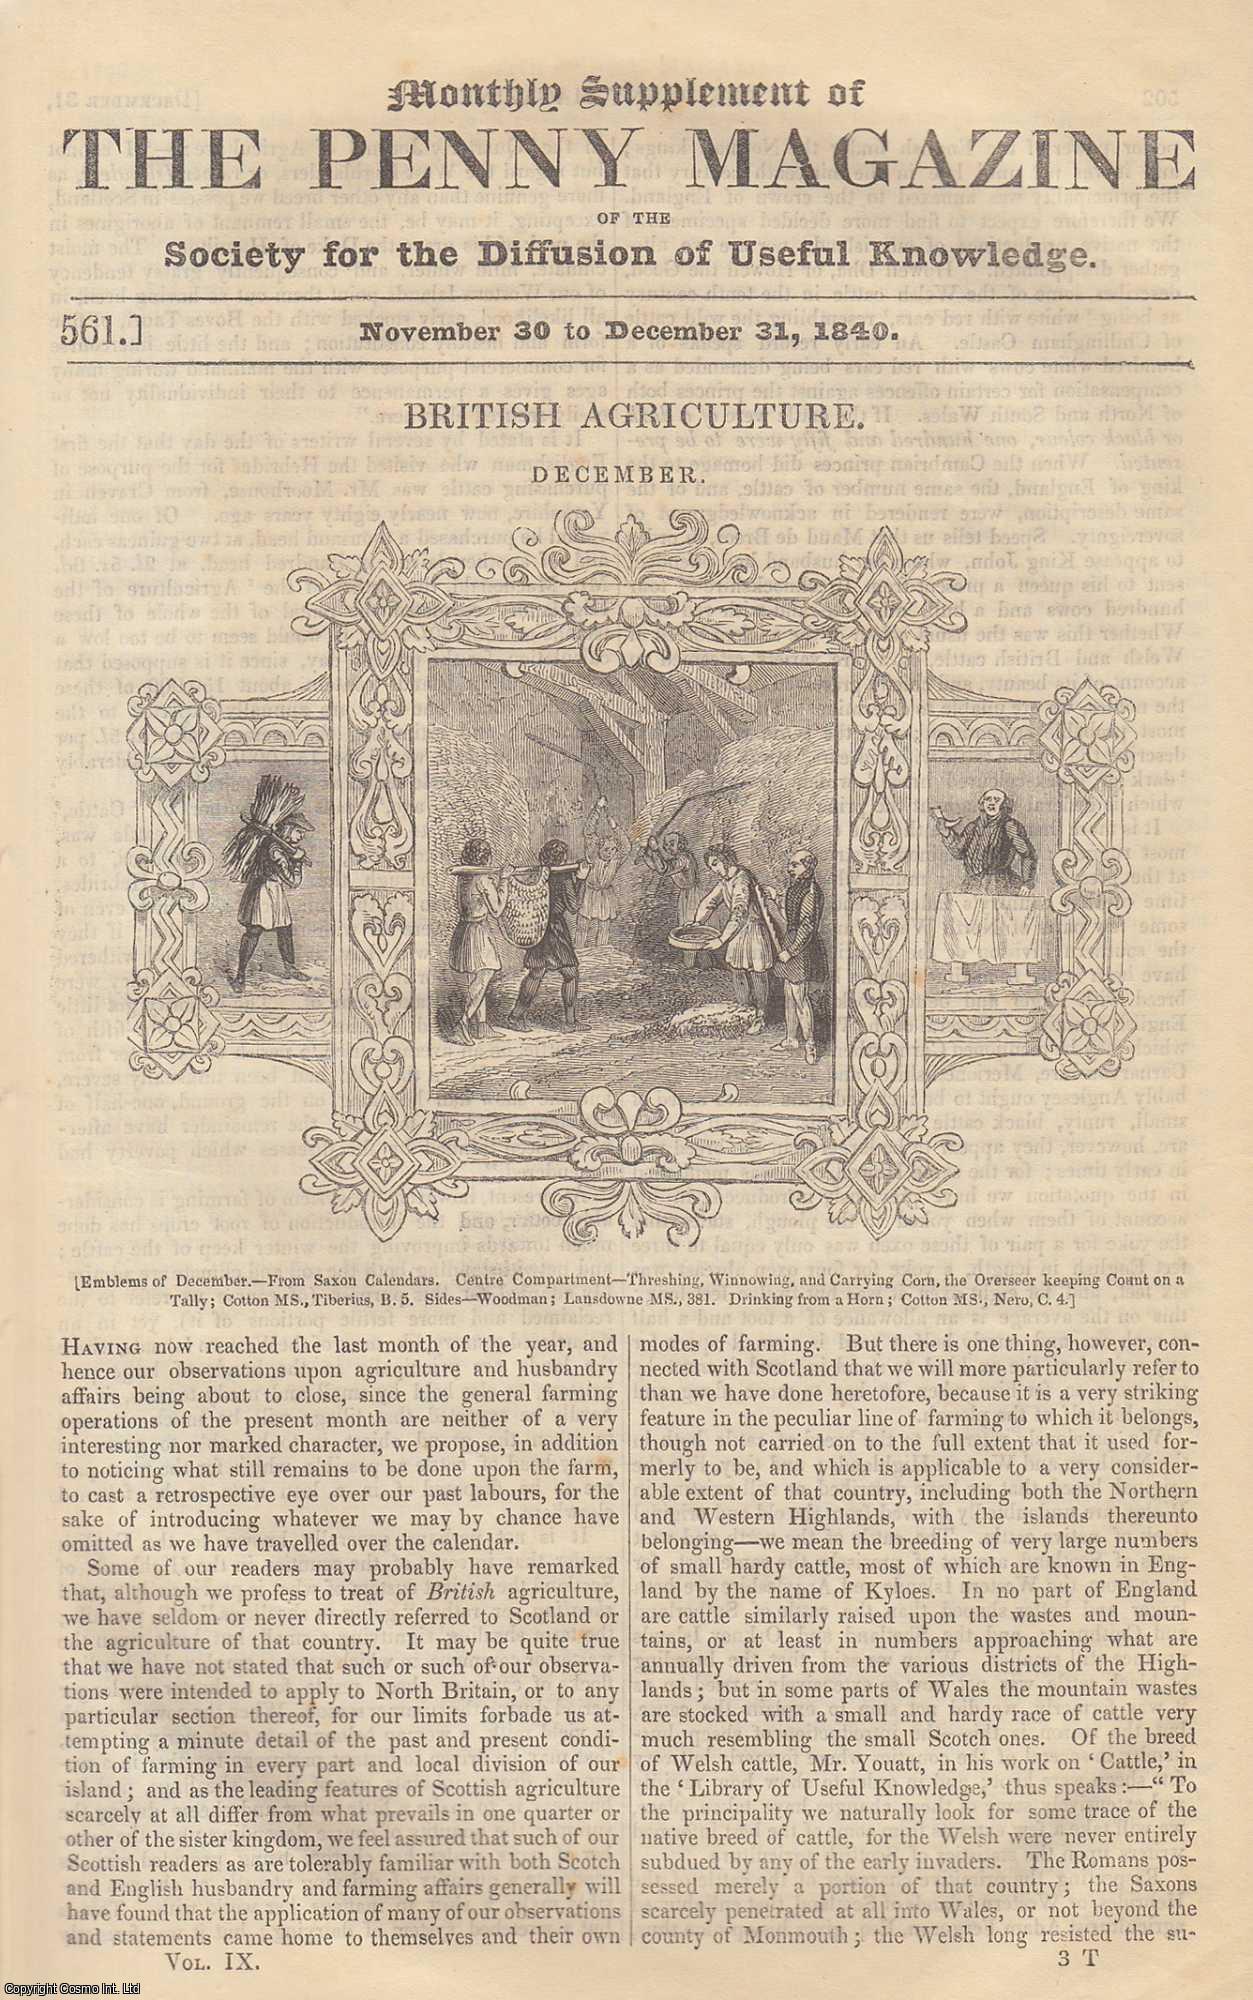 --- - British Agriculture (December). Issue No. 561, December 31st, 1840. A complete rare weekly issue of the Penny Magazine, 1840.